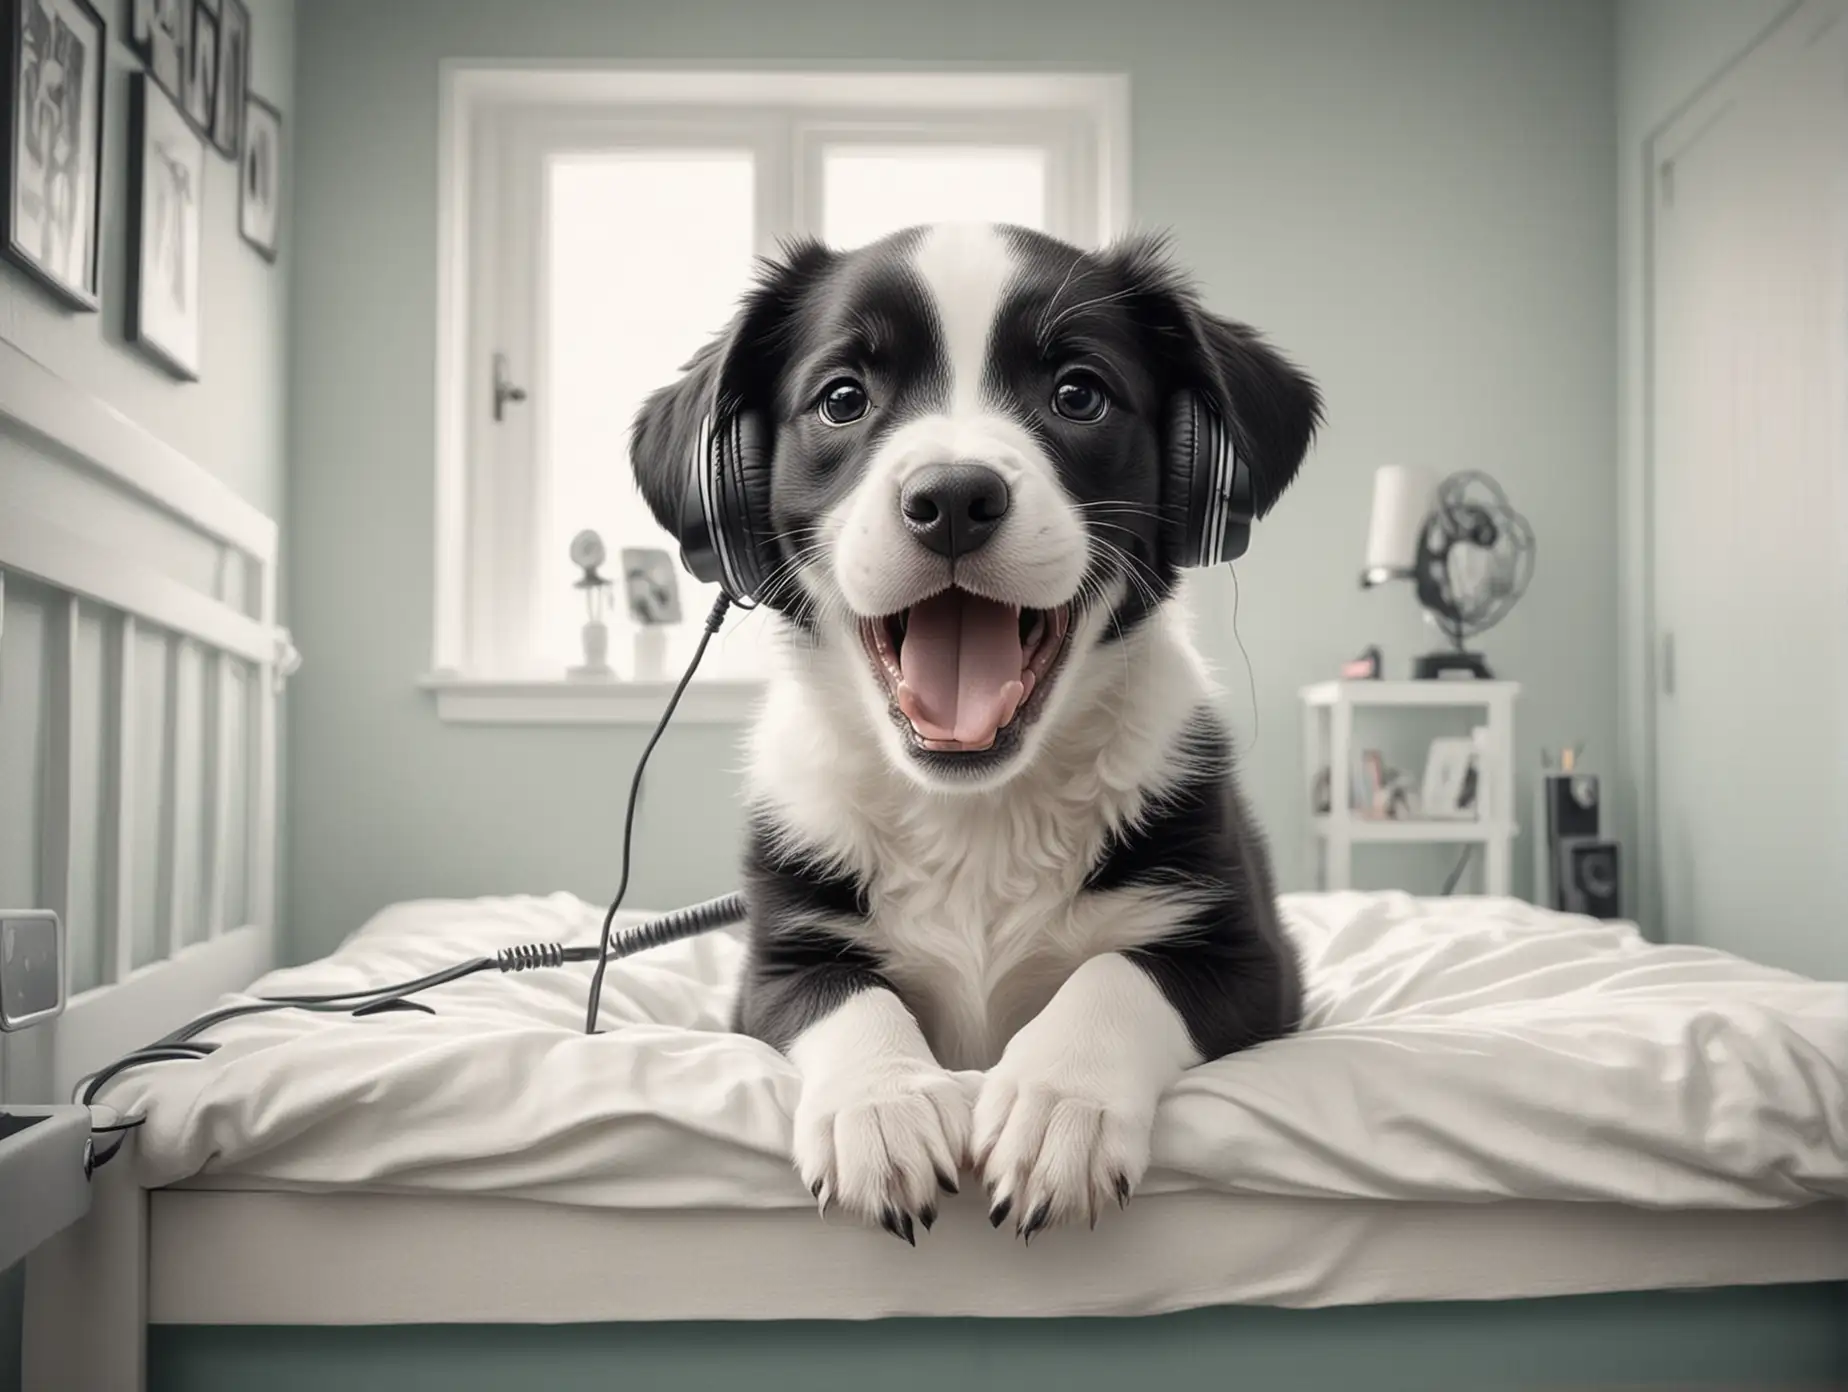 humorous illustration of a cute black&white puppy, yelling in pain, while listening to headphones, in a very  compact teenagers bedroom, cute pencil colour illustration